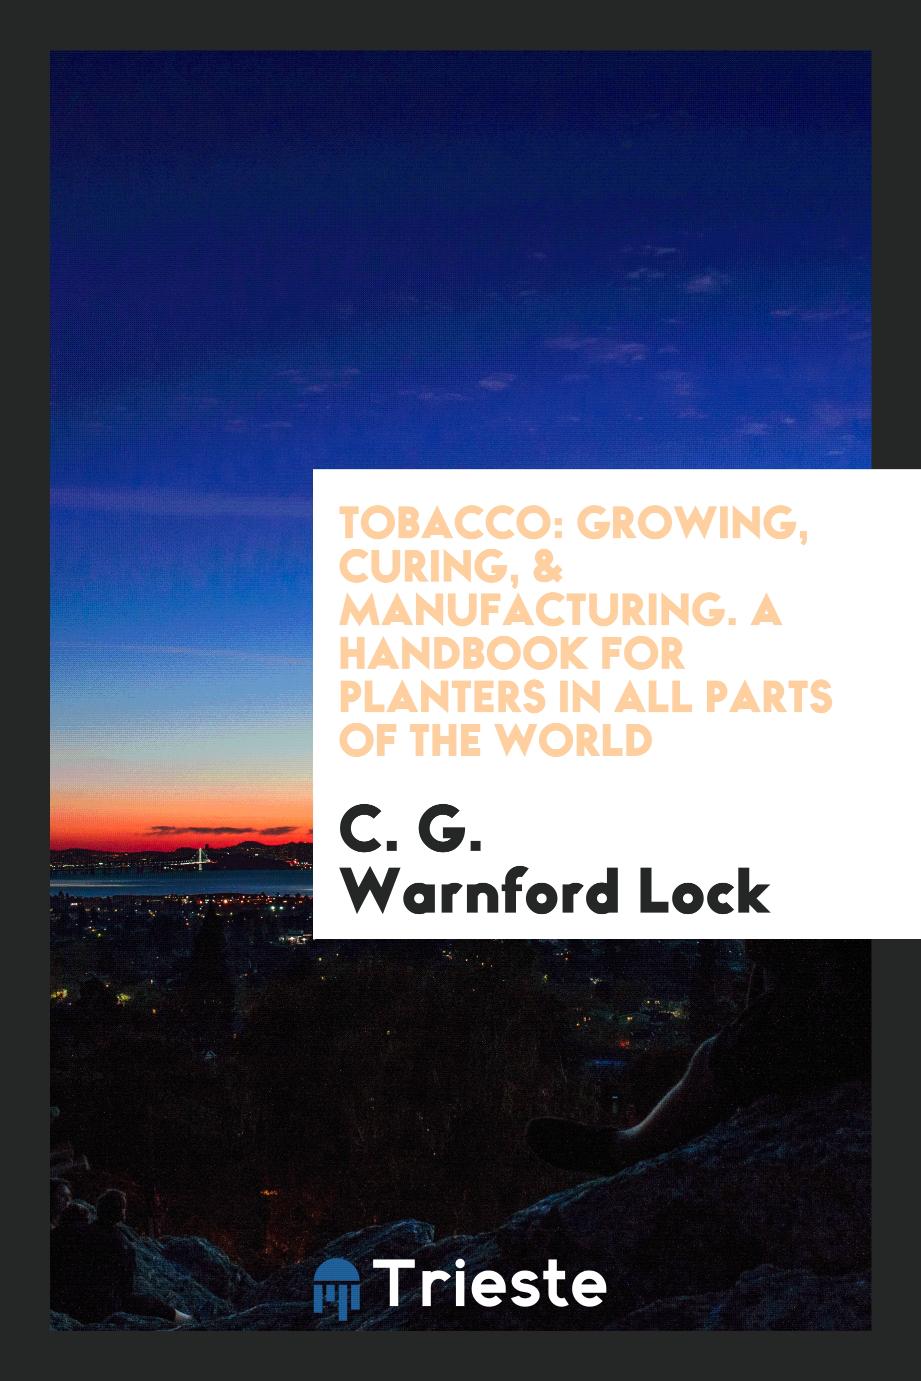 Tobacco: Growing, Curing, & Manufacturing. A Handbook for Planters in All Parts of the World